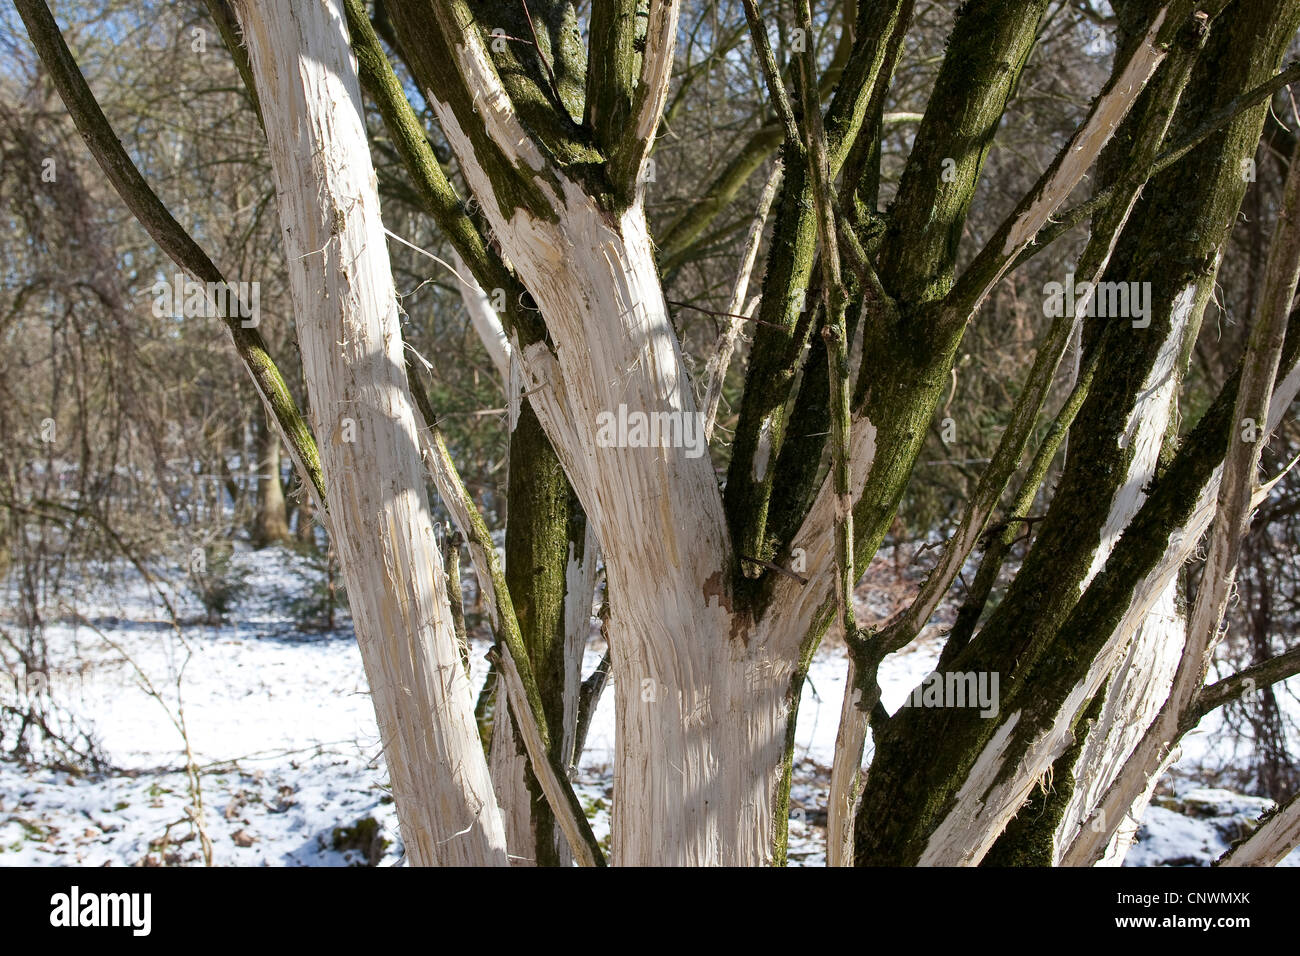 red deer (Cervus elaphus), trees and bushes in a winter landscape with bark eaten away by animals Stock Photo